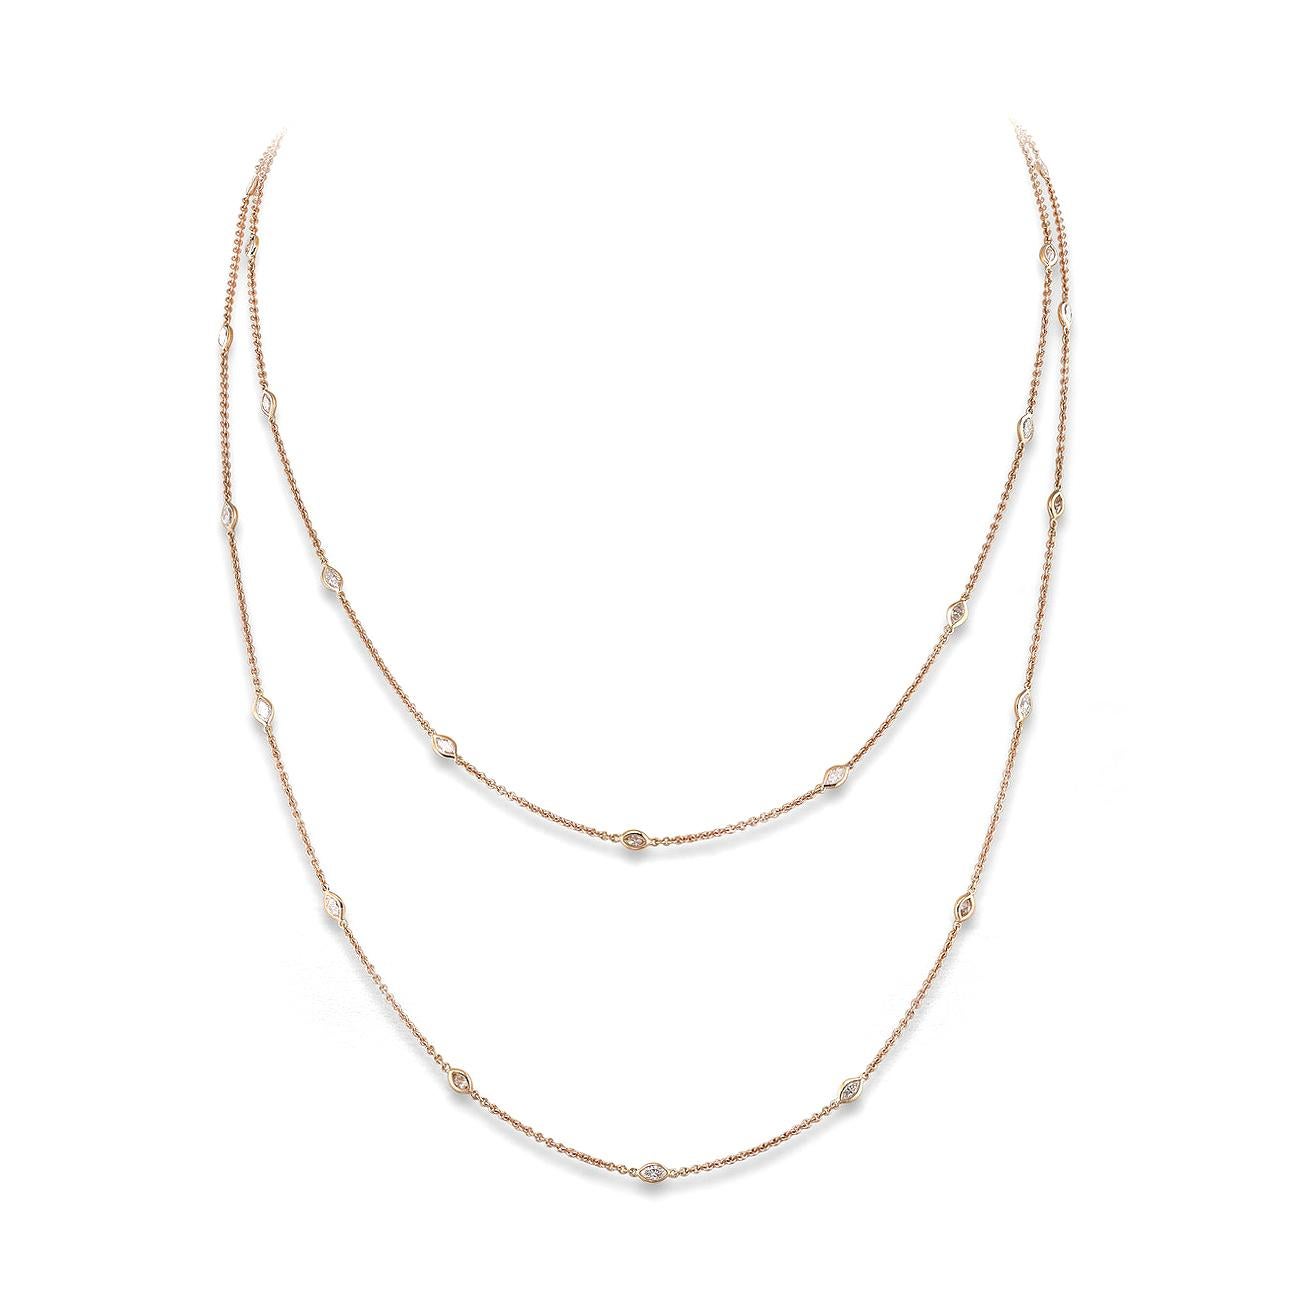 Necklace in 18kt pink gold set with 31 marquise cut diamond 3.77cts (125 cm)     